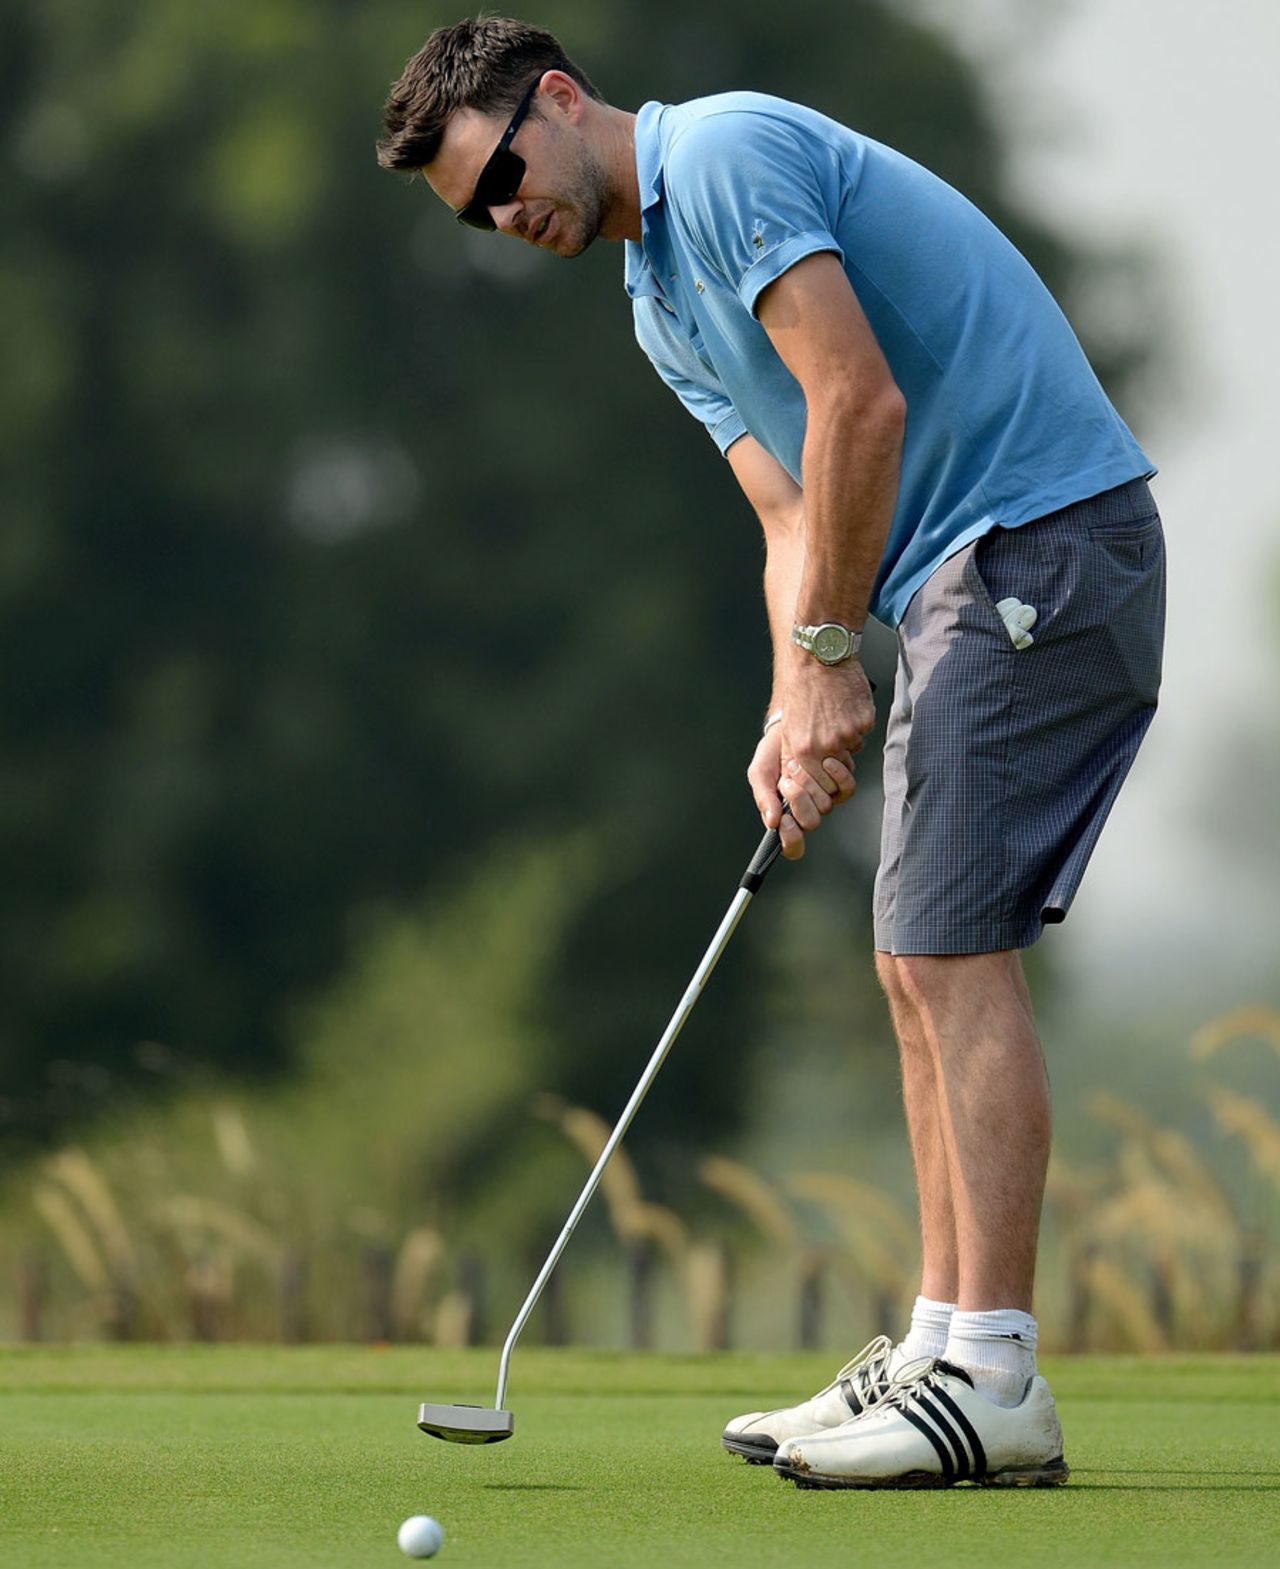 James Anderson on the golf course before England's final tour match, which he could be rested for, Ahmedabad, November, 7, 2012